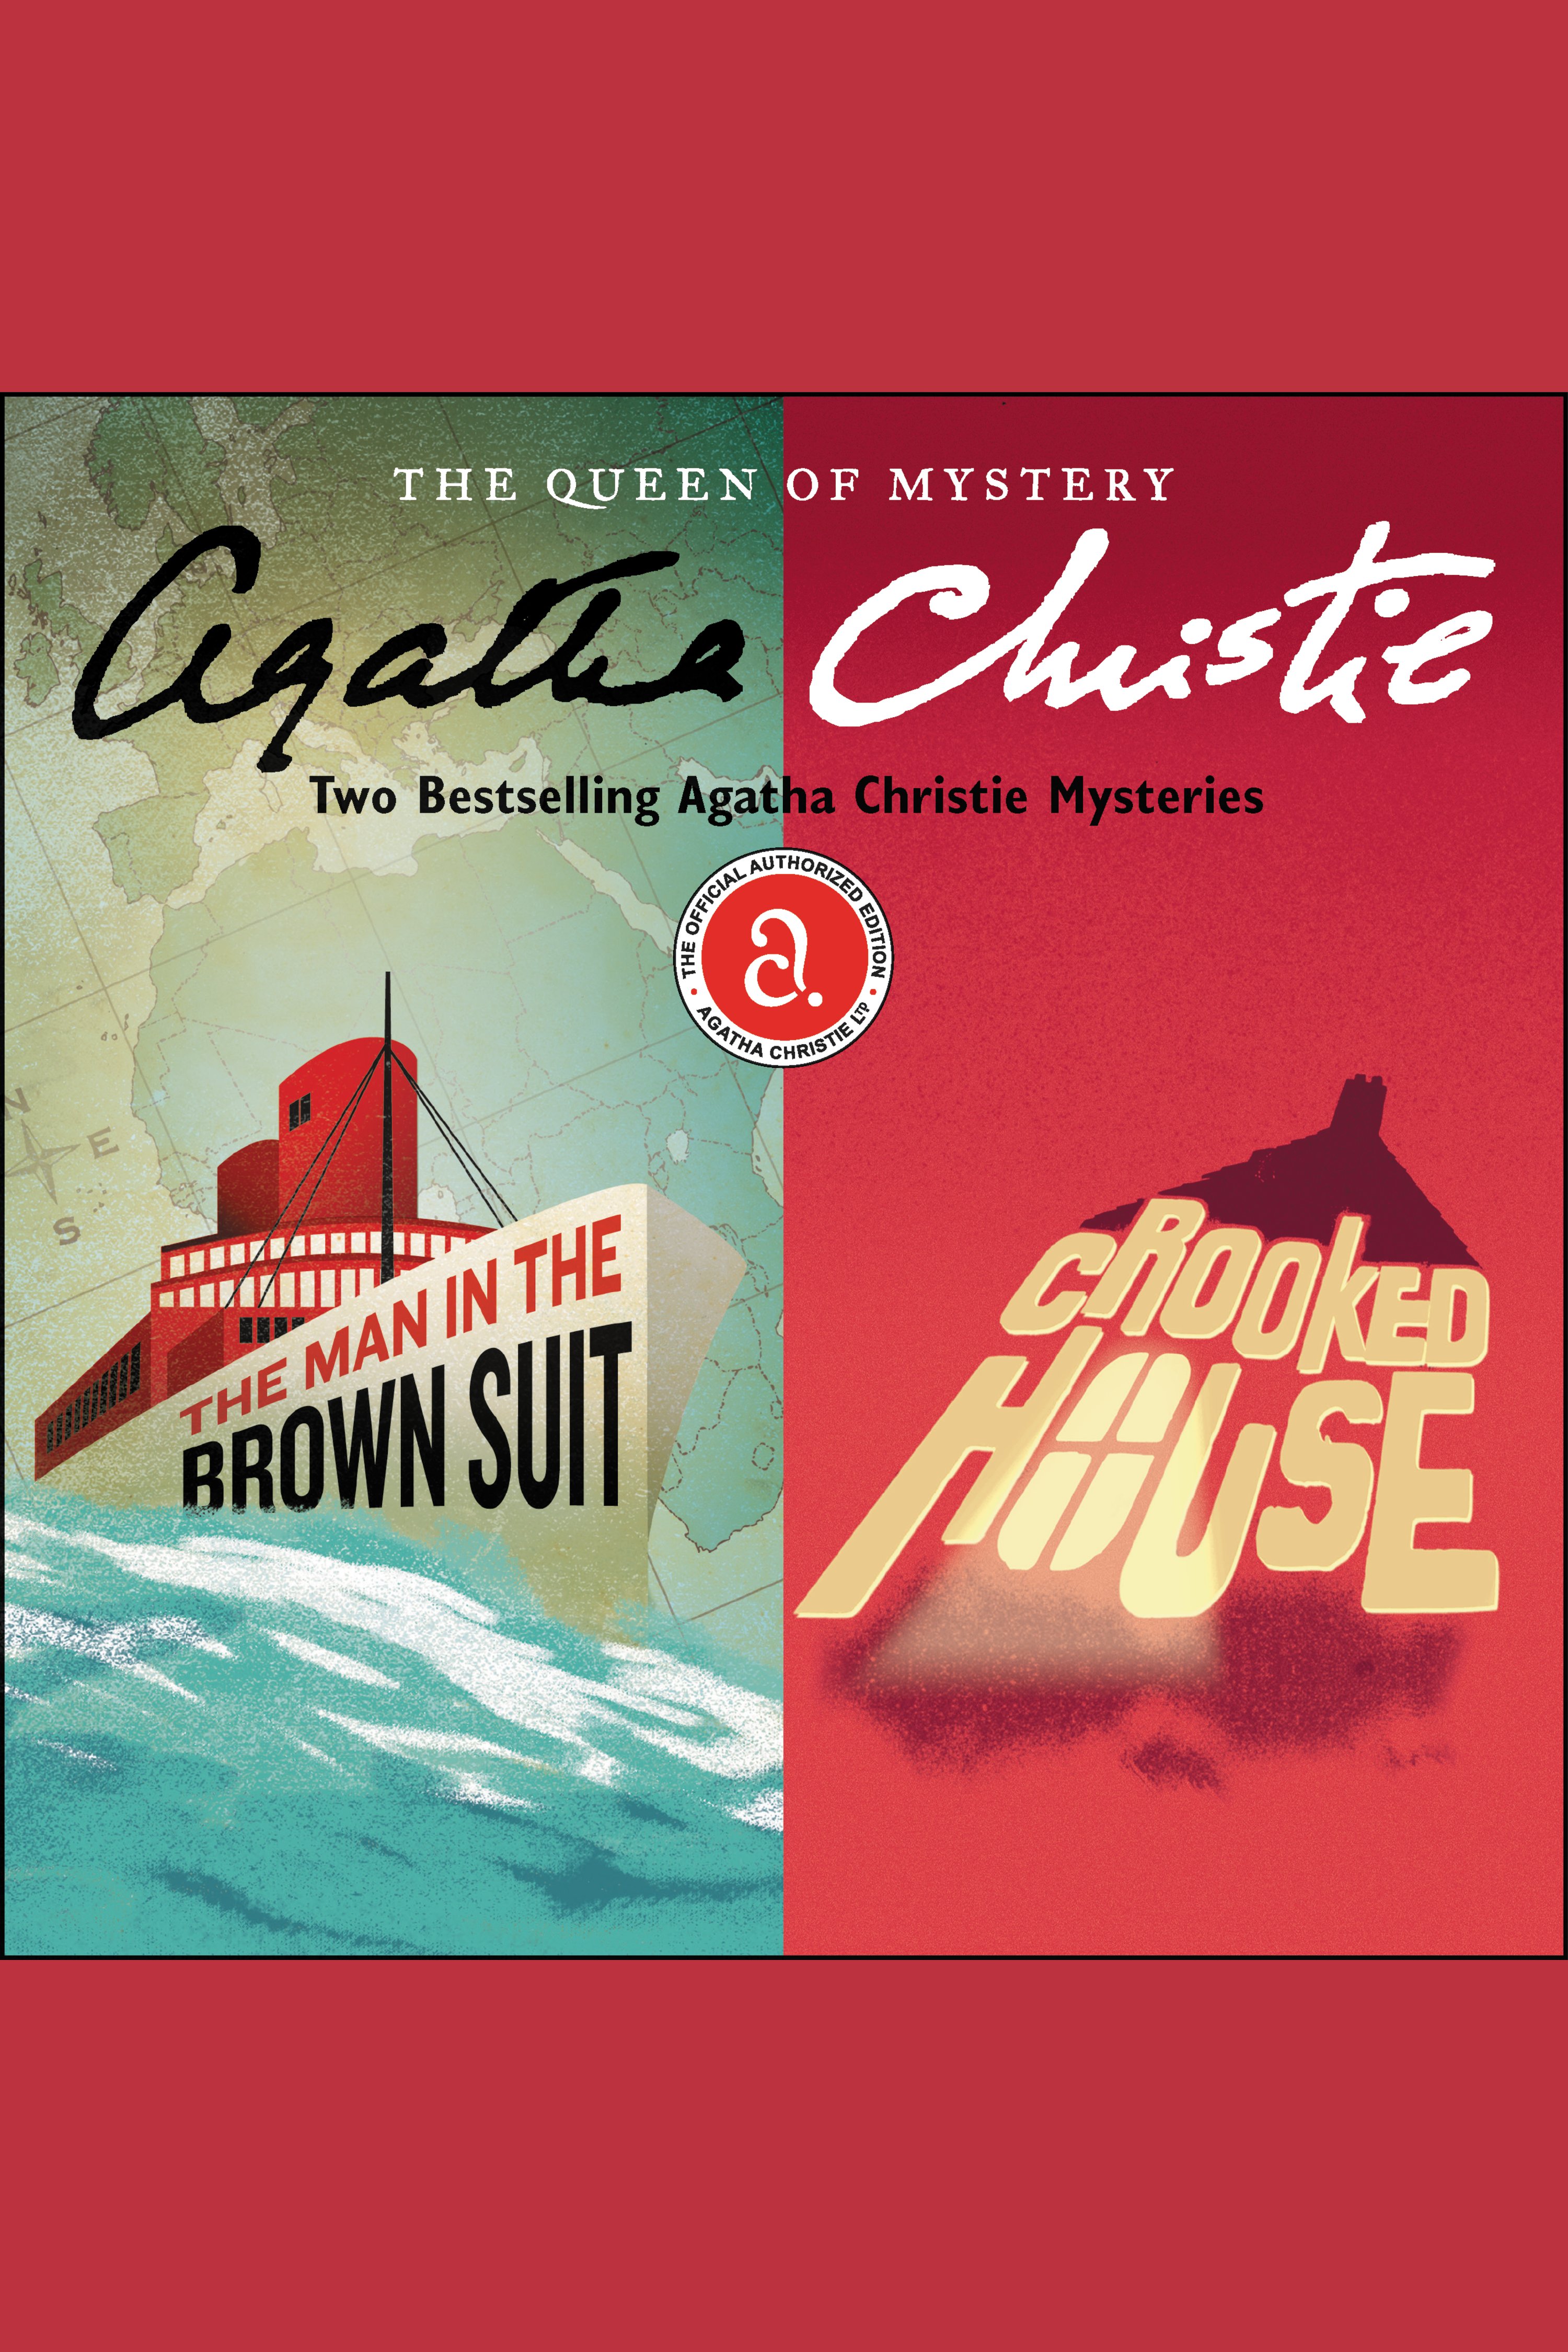 Image de couverture de Man in the Brown Suit & Crooked House, The [electronic resource] : Two Bestselling Agatha Christie Novels in One Great Audiobook